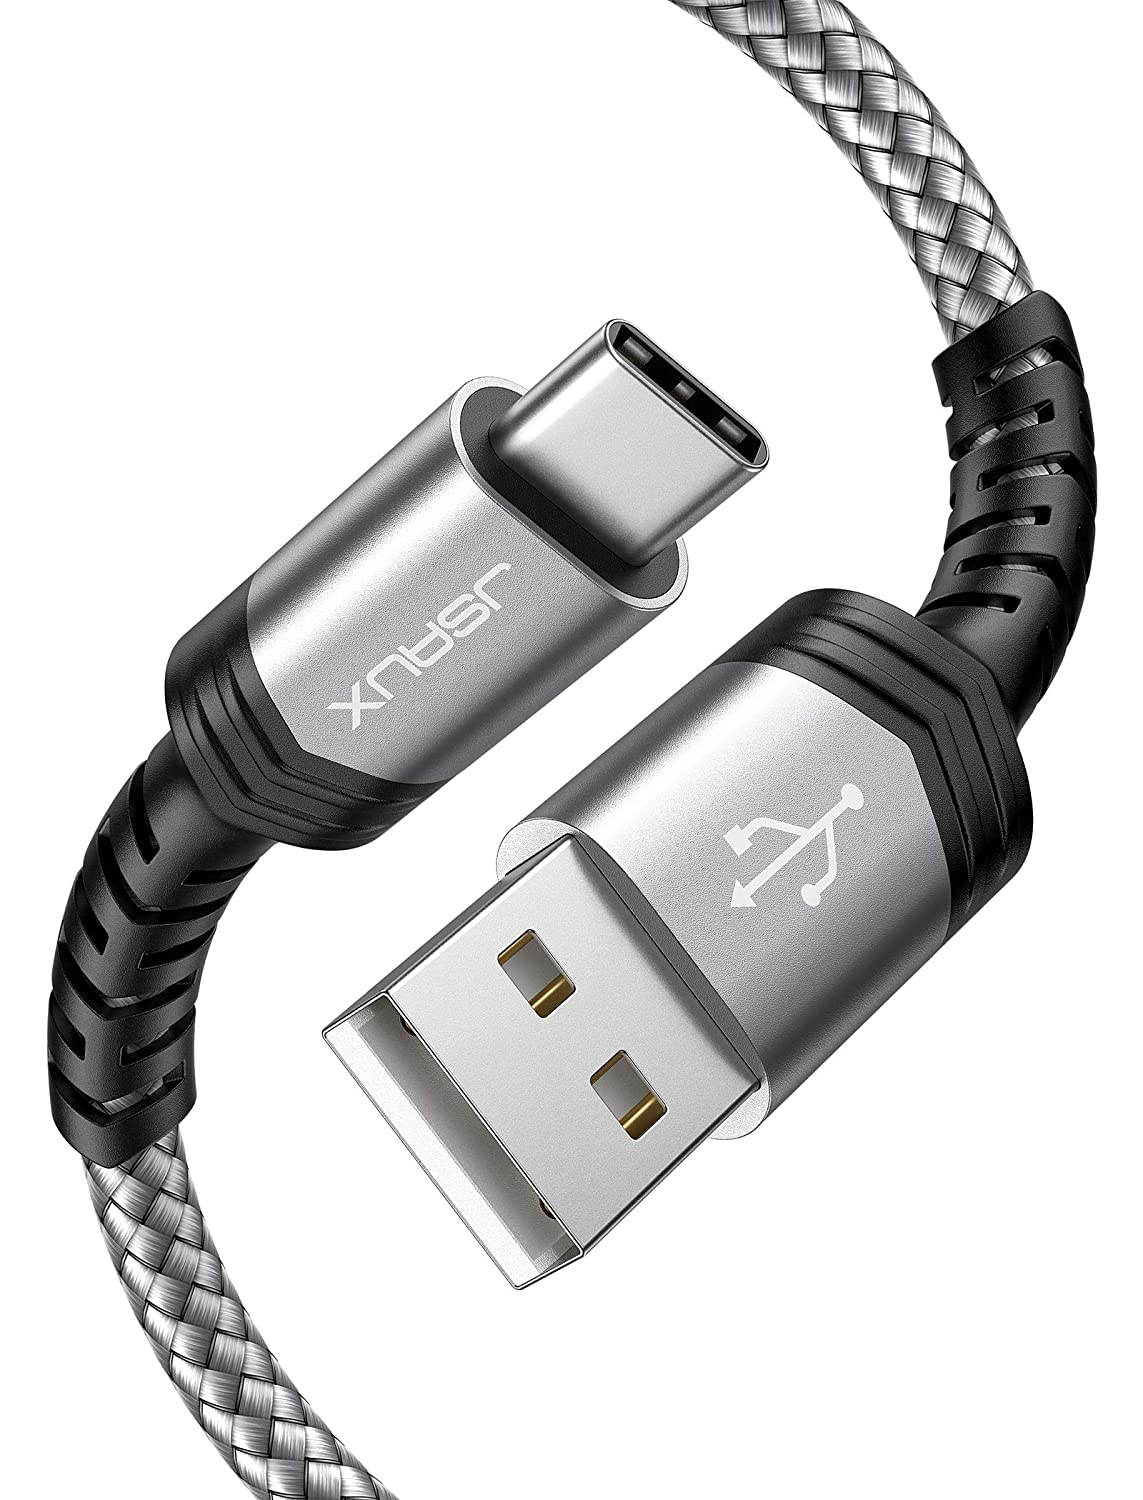 USB Type C Cable 3A Fast Charging Braided Cord Compatible with Samsung Galaxy S10 S9 S8 S20 Plus A51 A11,Note 10 9 8, PS5 Controller, USB C